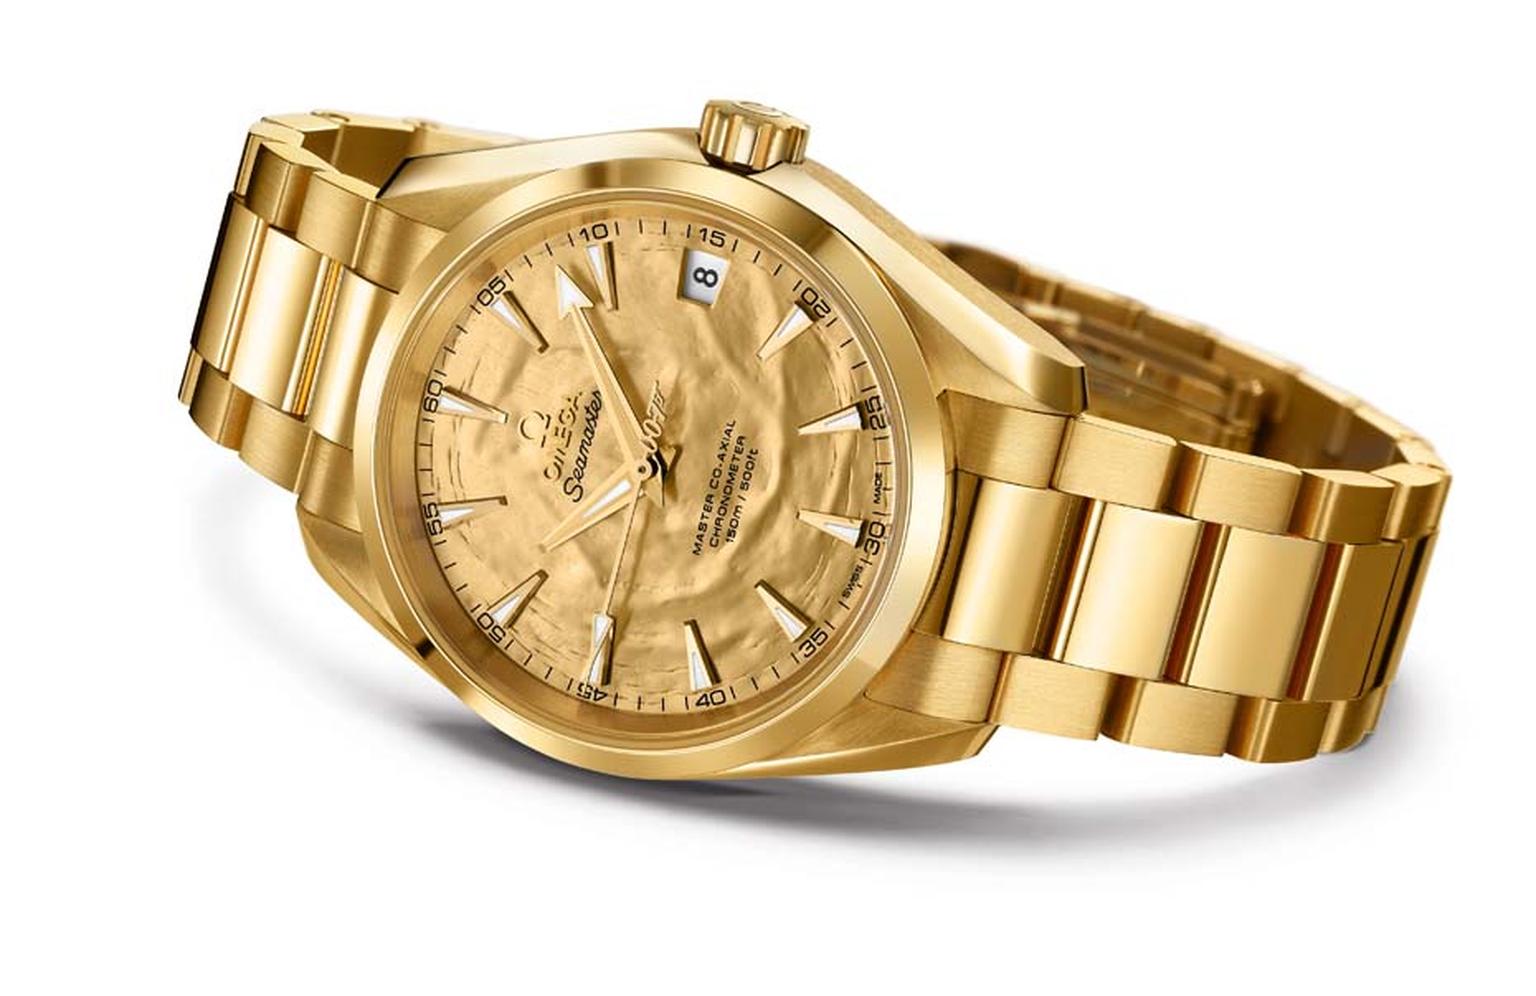 Coinciding with the 50th anniversary of Goldfinger, Christie’s auctioned an Omega Seamaster Aqua Terra watch in dazzling yellow gold fetching eight times its estimated price.